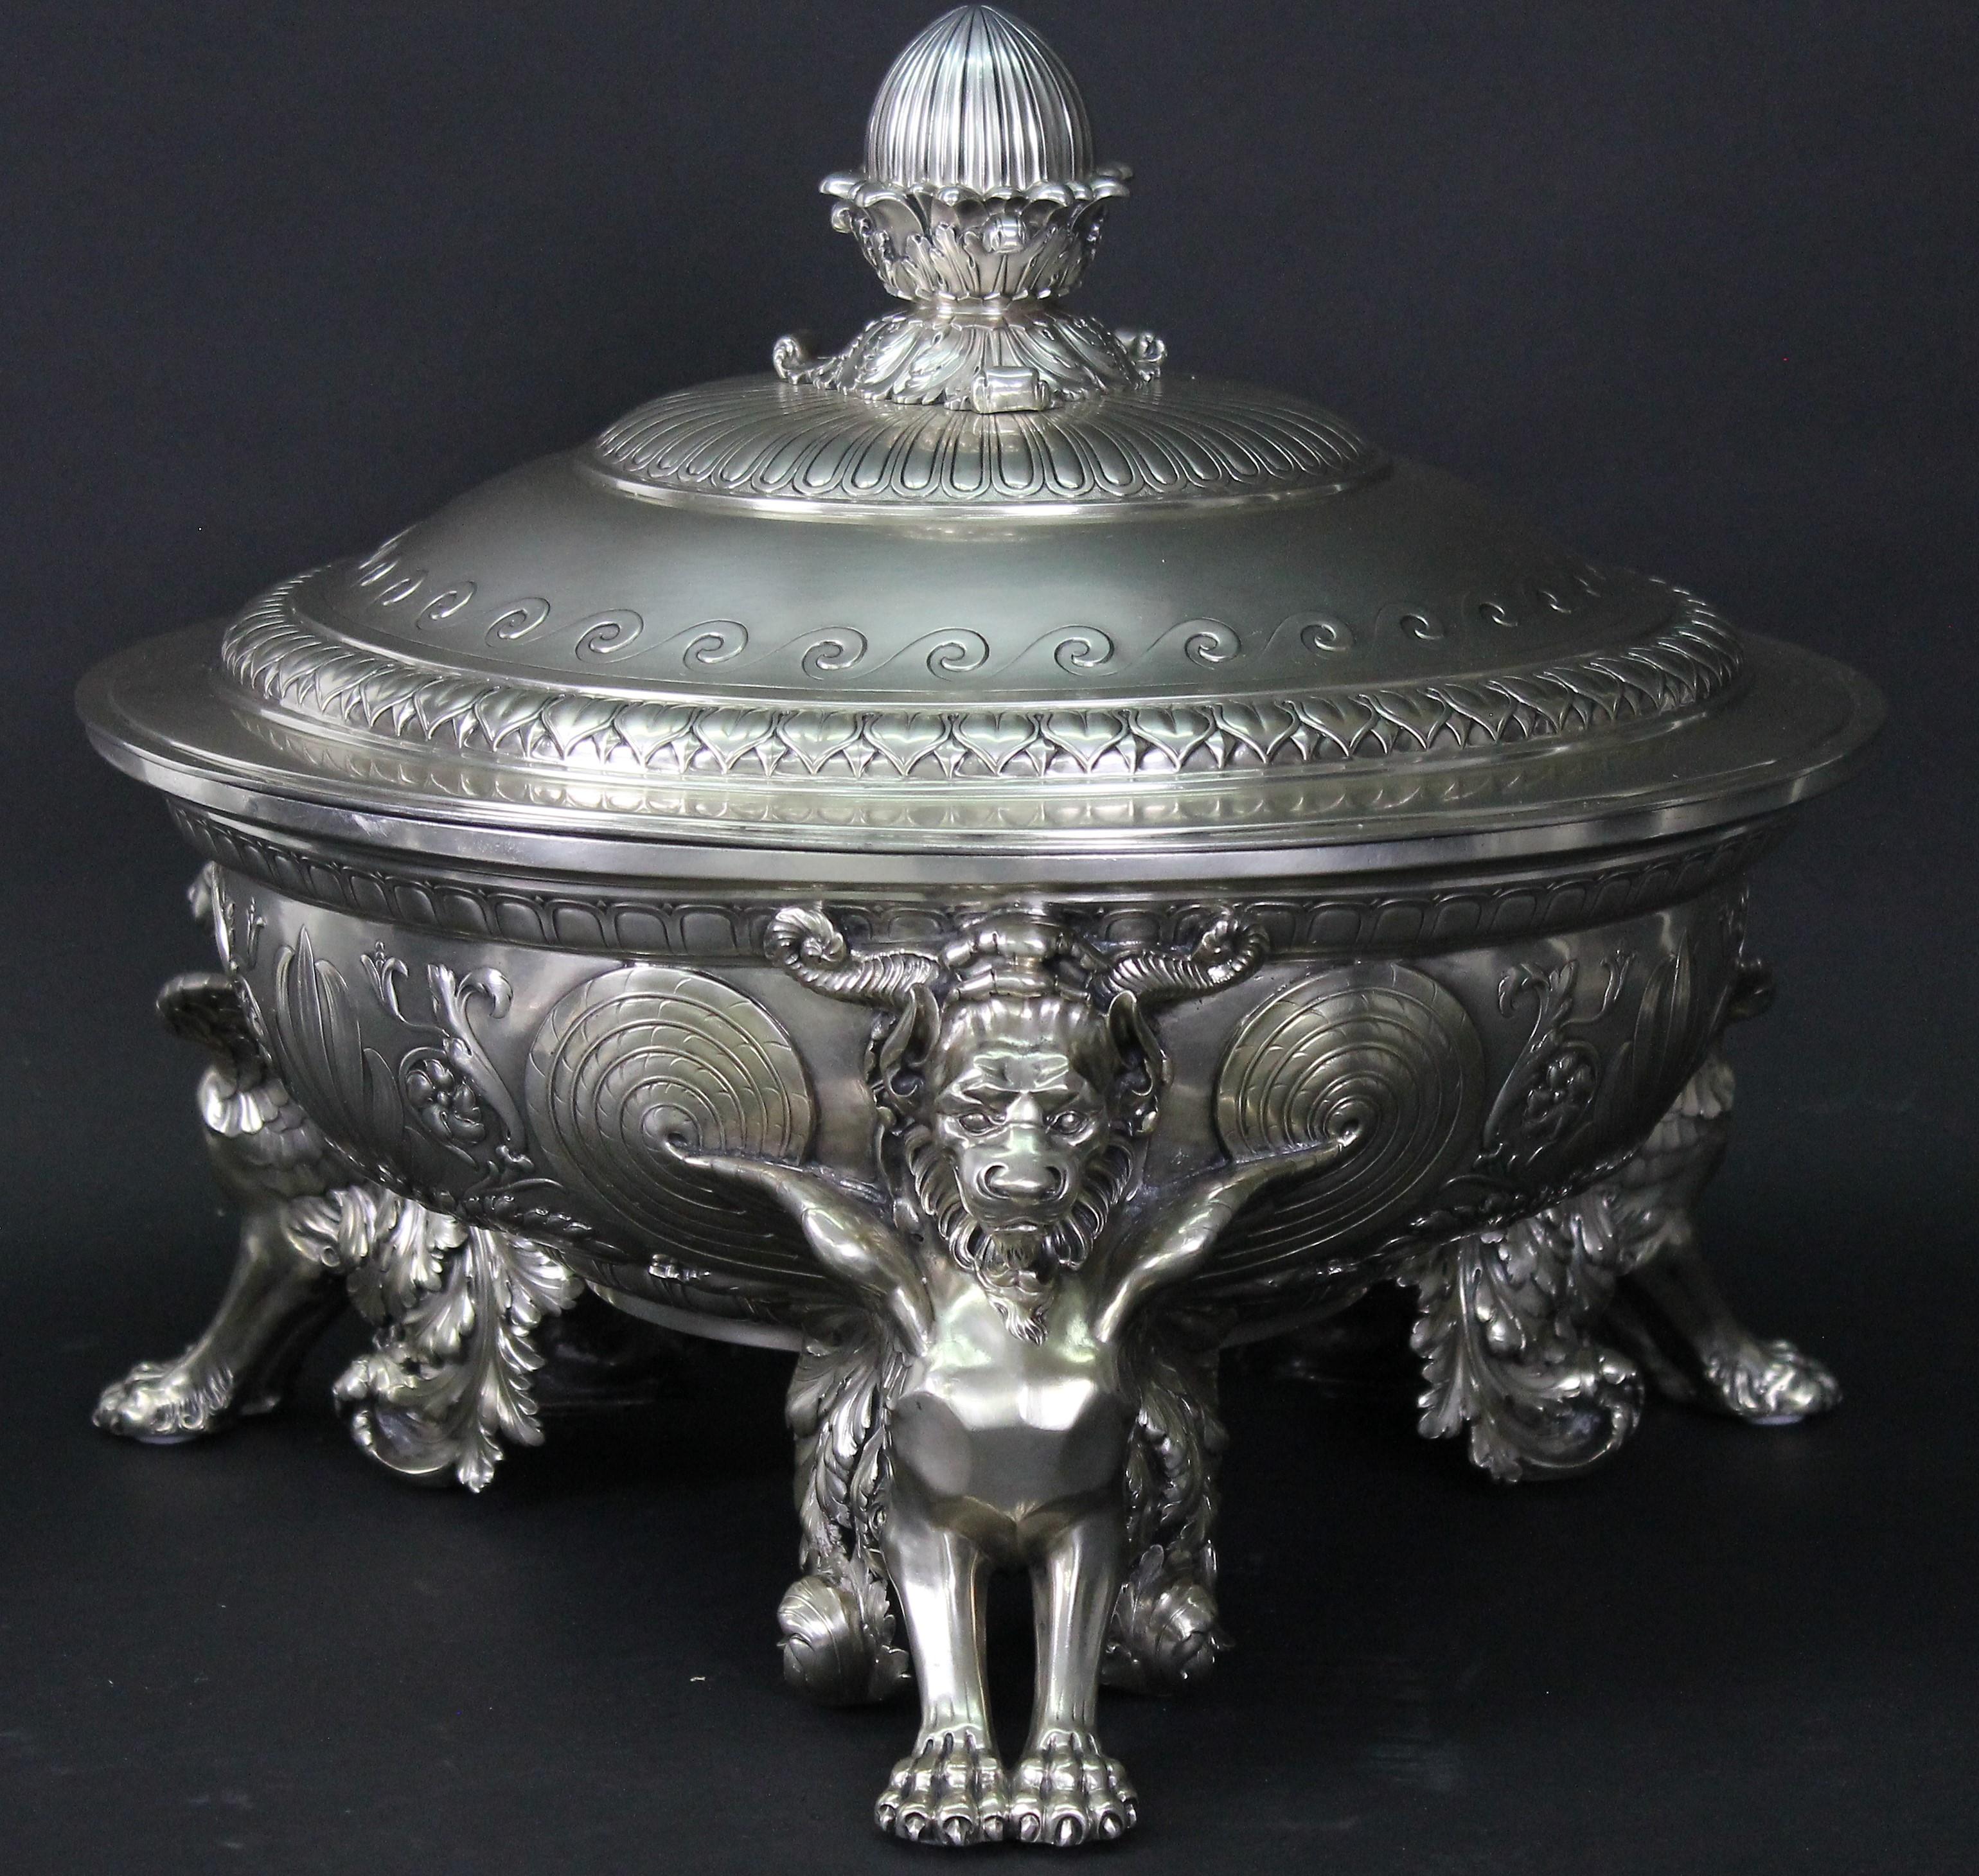 Monumental Antique Silver Tureen by Wilkens & Söhne 1905, Bremen Germany 3